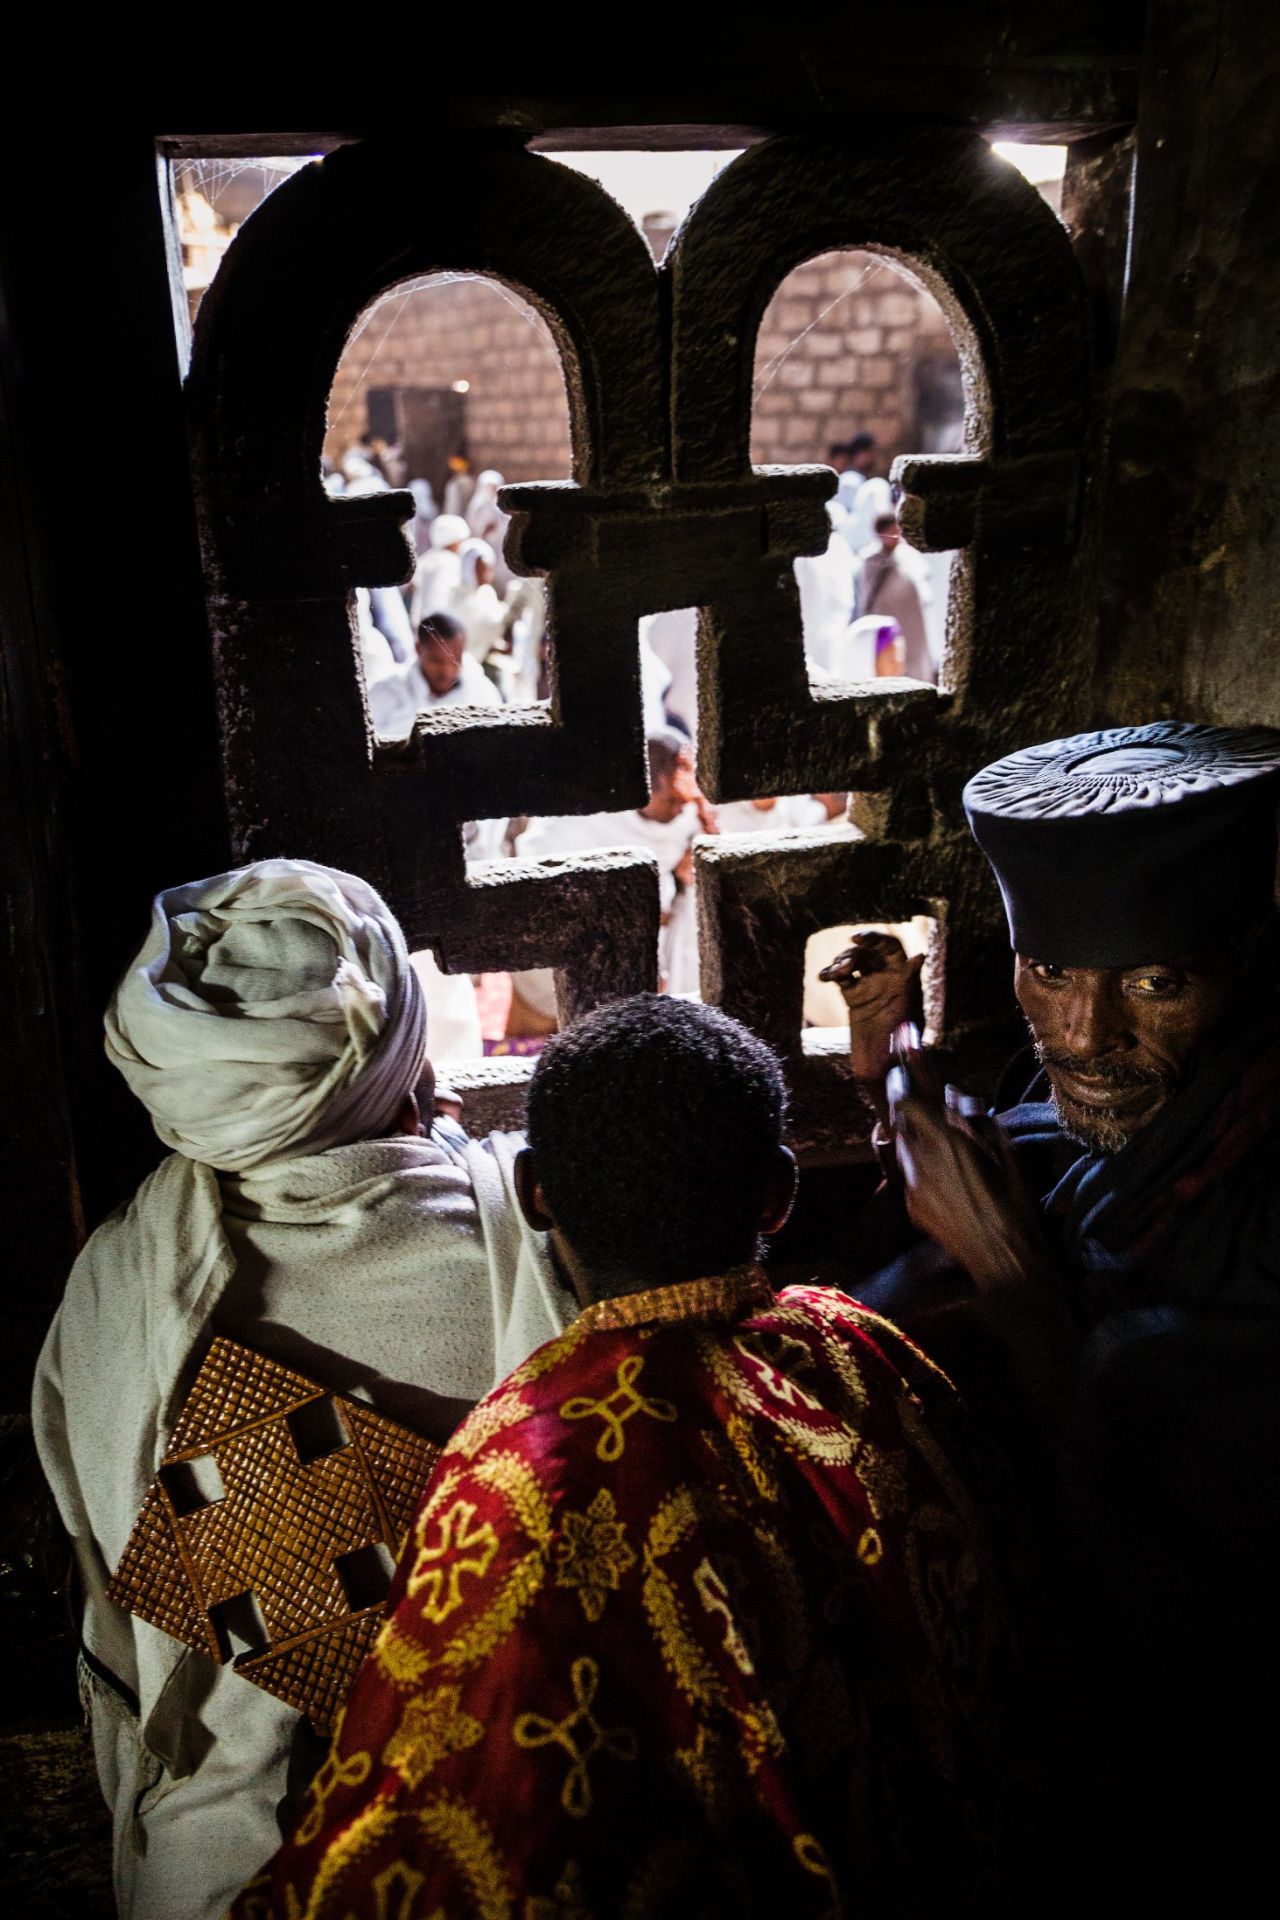 Here the priests of Lalibela look out of an intricately carved window of their church to the crowds below. Every church in Lalibela has a resident priest who wears ornate brocade robes and carries a large processional cross.